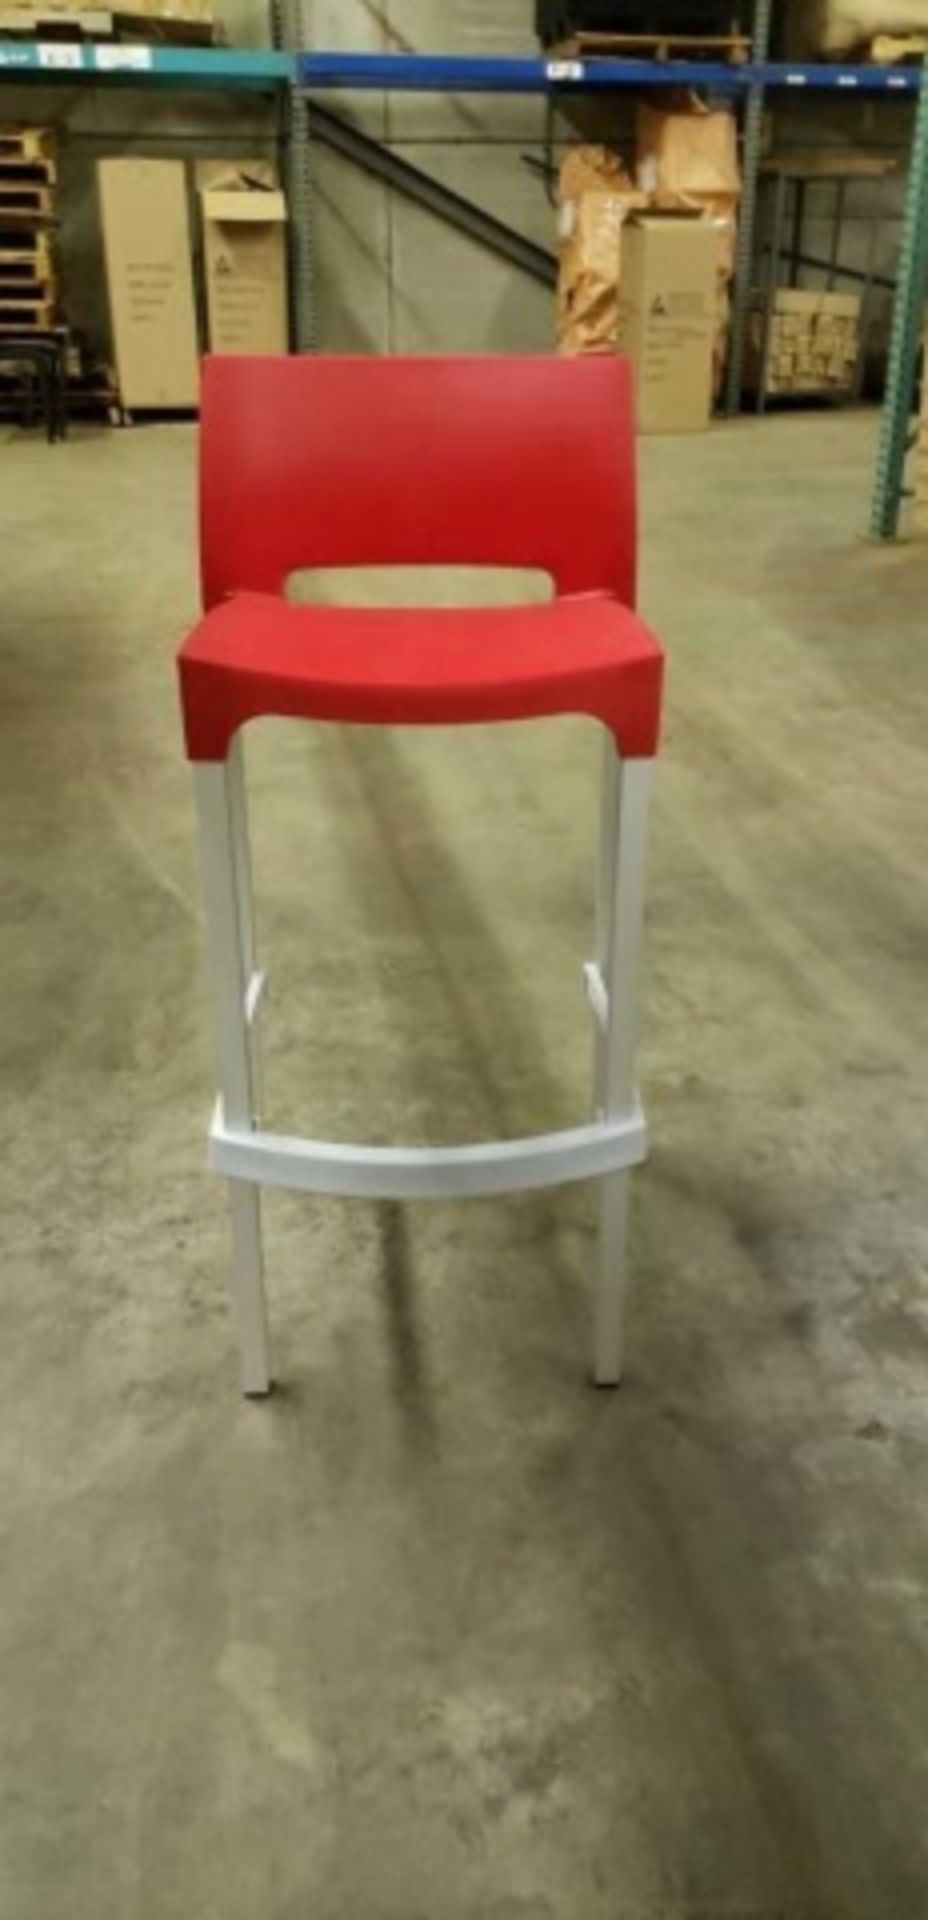 Dom / Gio Barstool With Back - Red. Square Tubular anodized matte aluminum legs, Resin seat and back